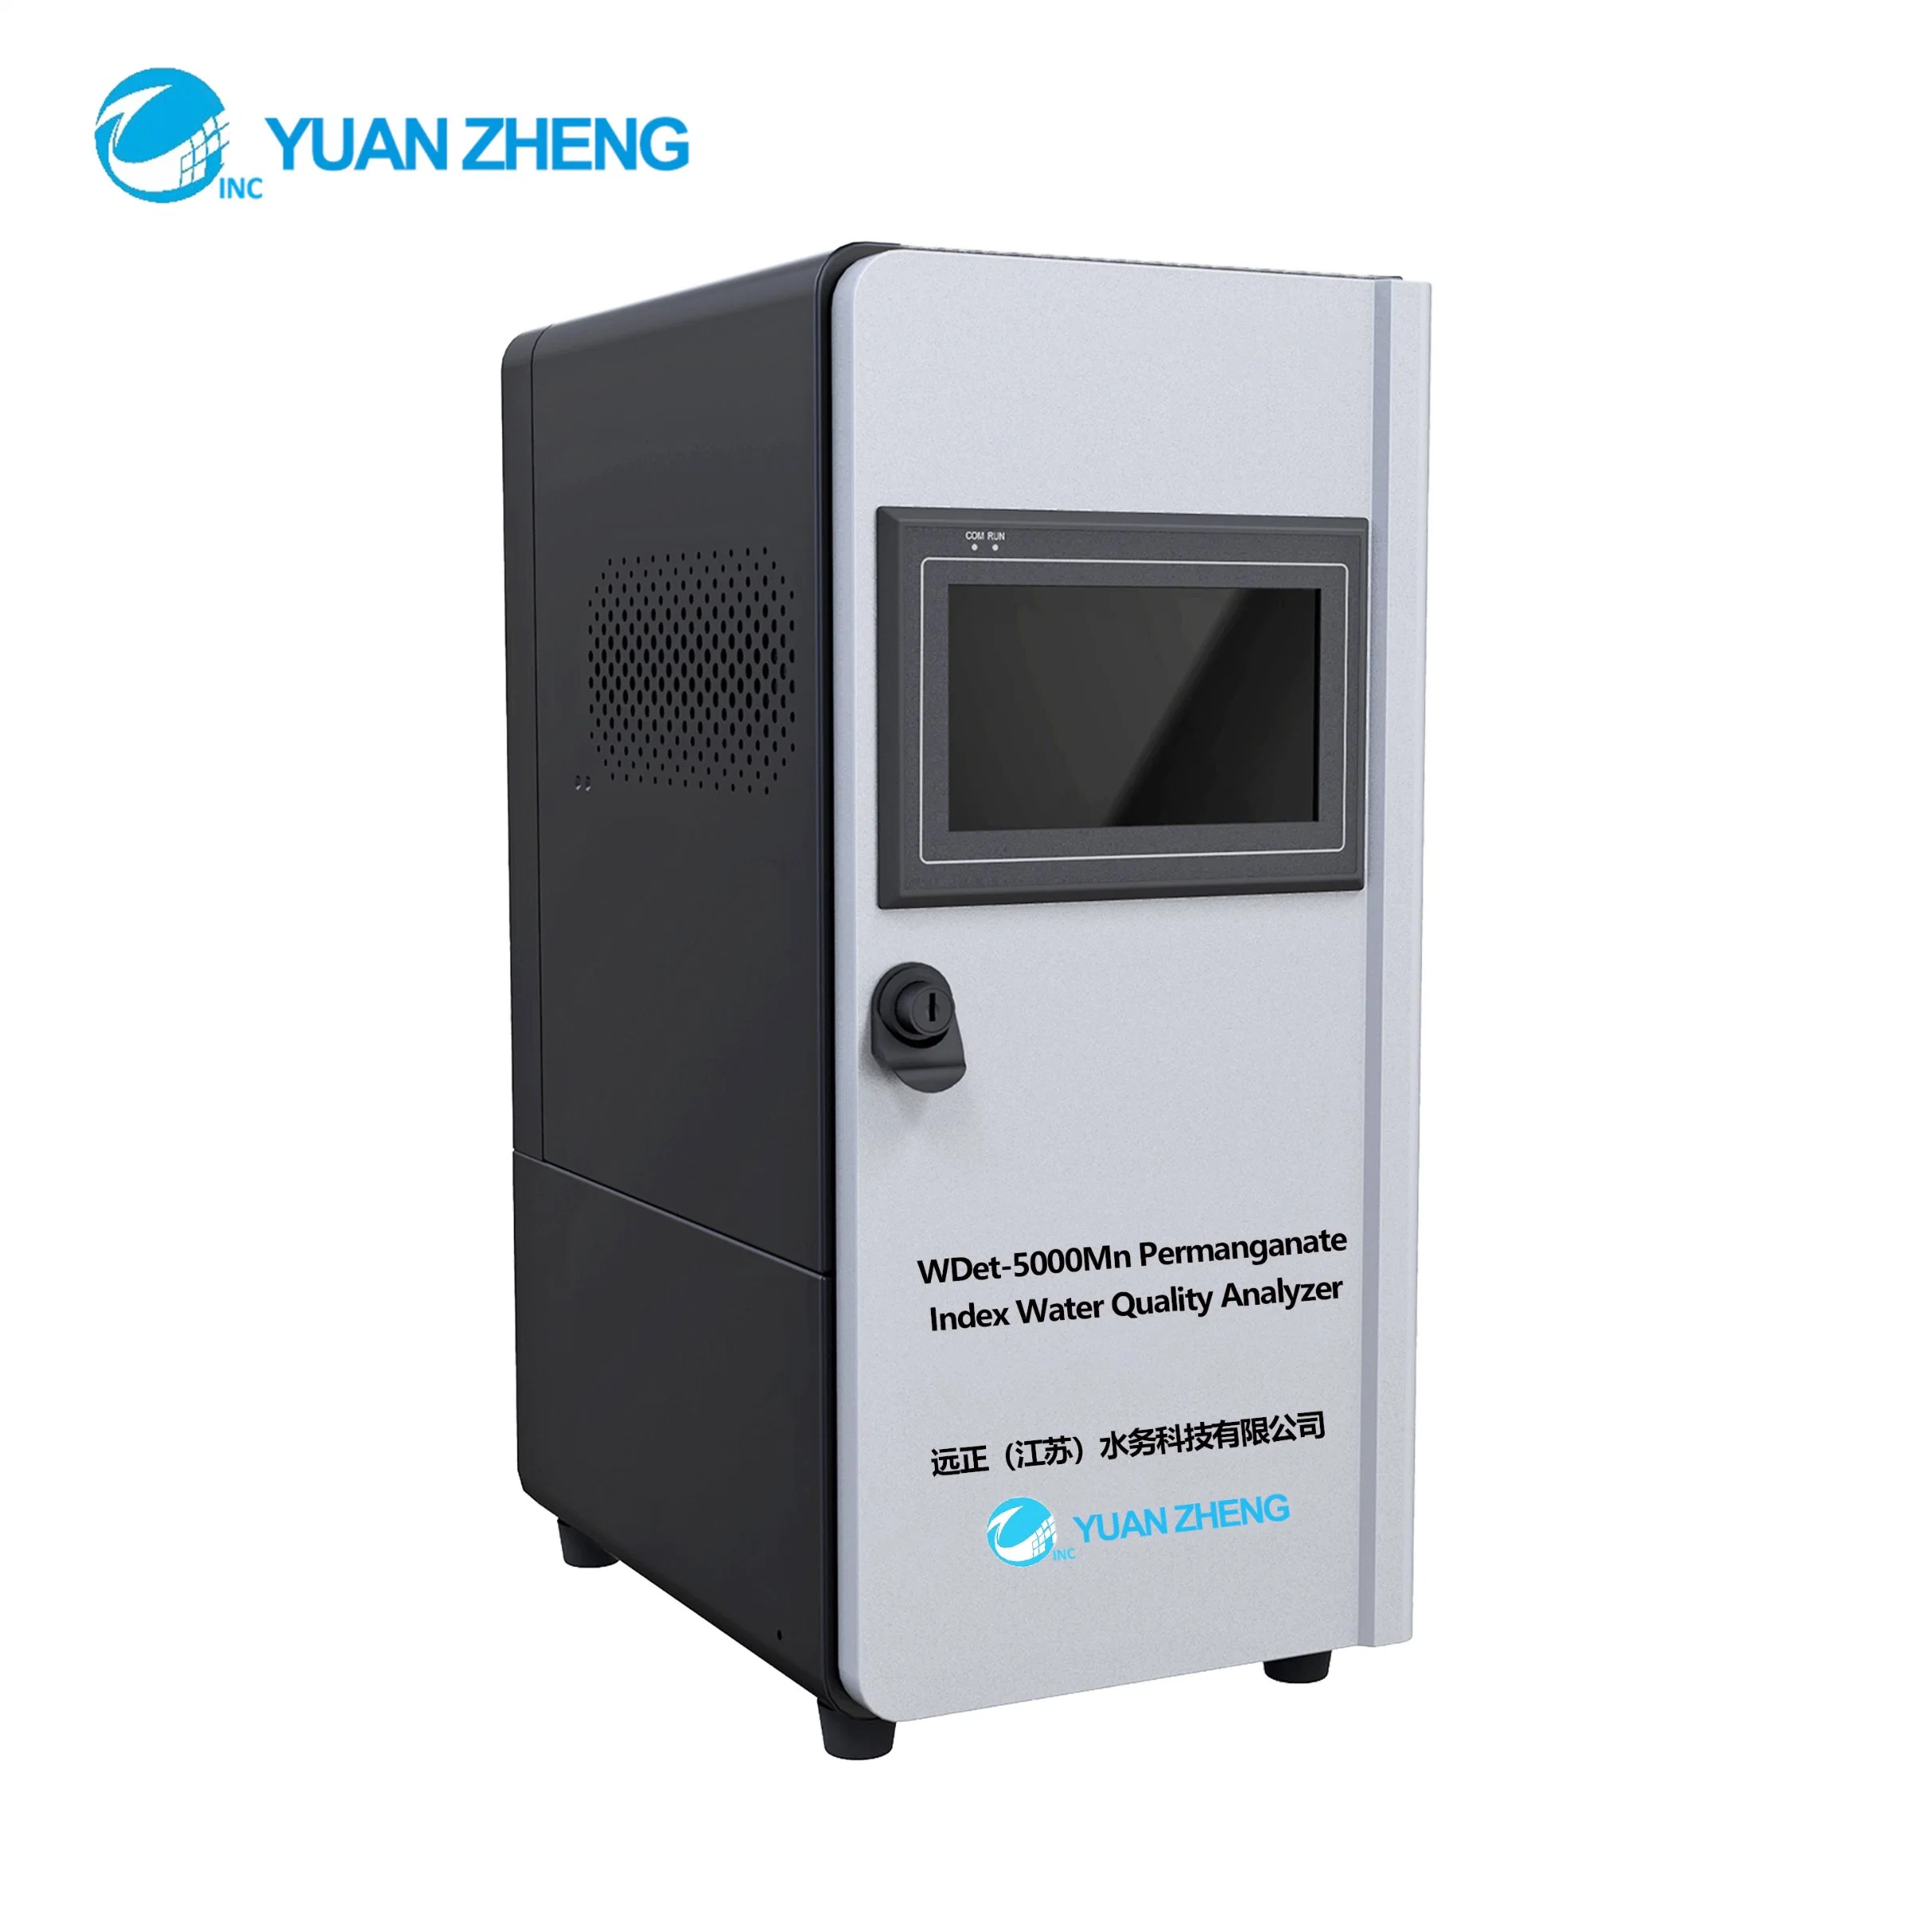 High Performance Permanganate Index Water Quality Analyzer, High Reliability, Long Service Life, Suitable for Long Time Online Monitoring